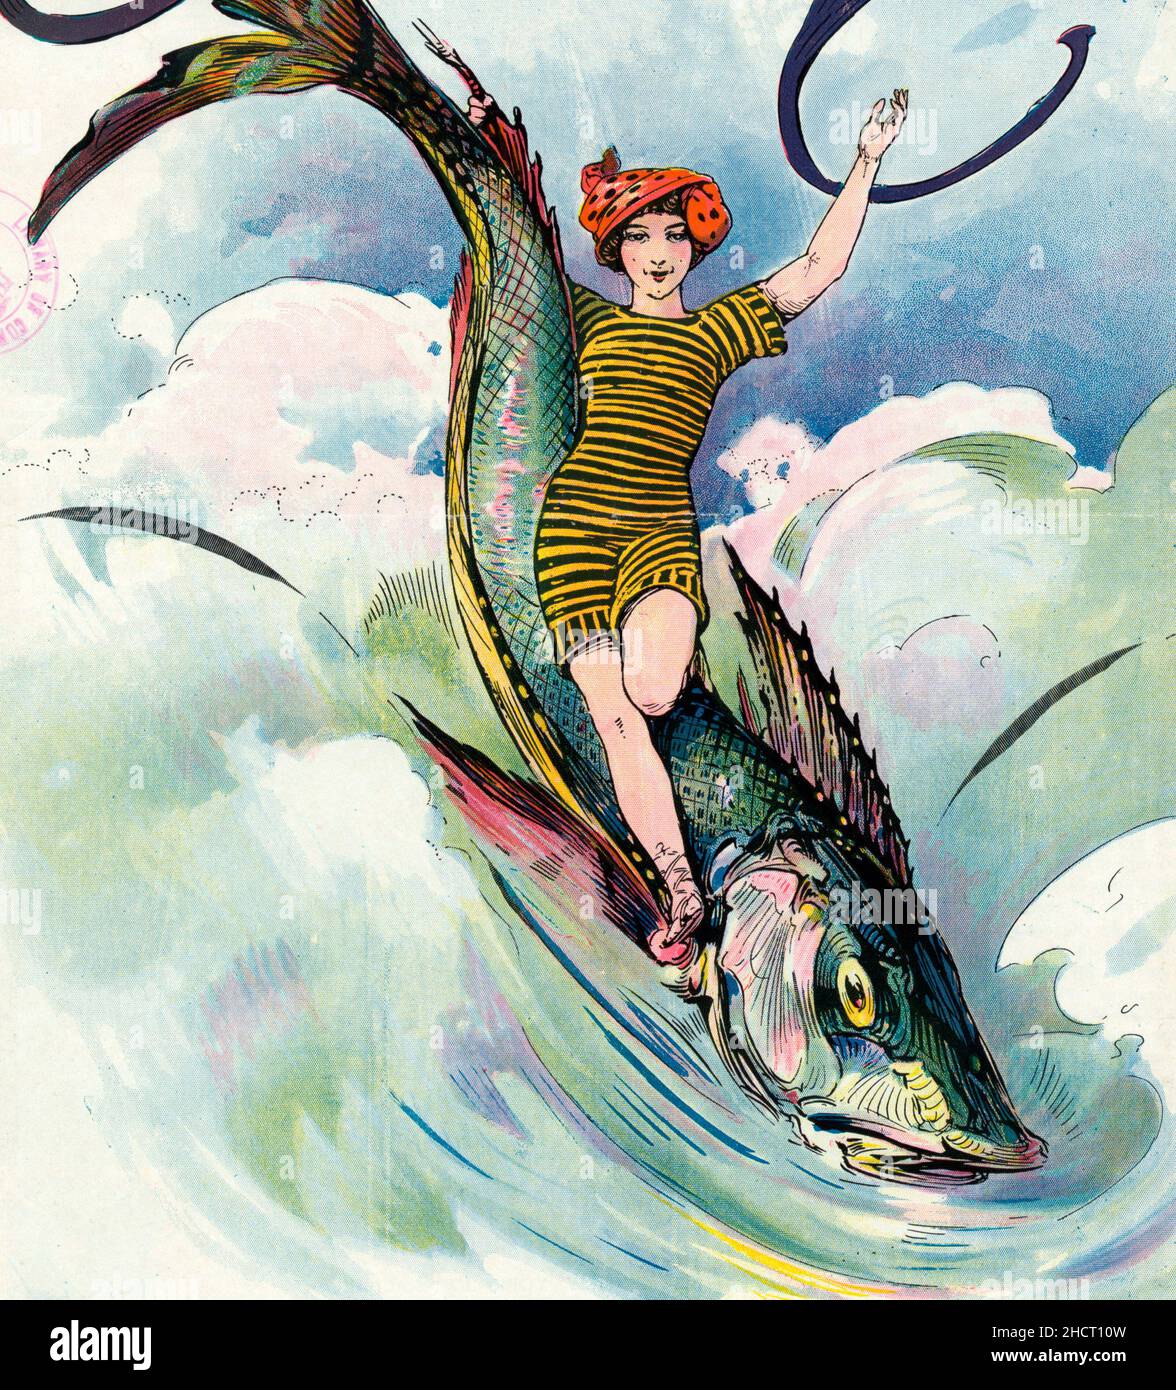 The maid of the summer surf -  Illustration shows a woman wearing a swimsuit, standing on a large fish that is splashing through waves, 1911 Stock Photo